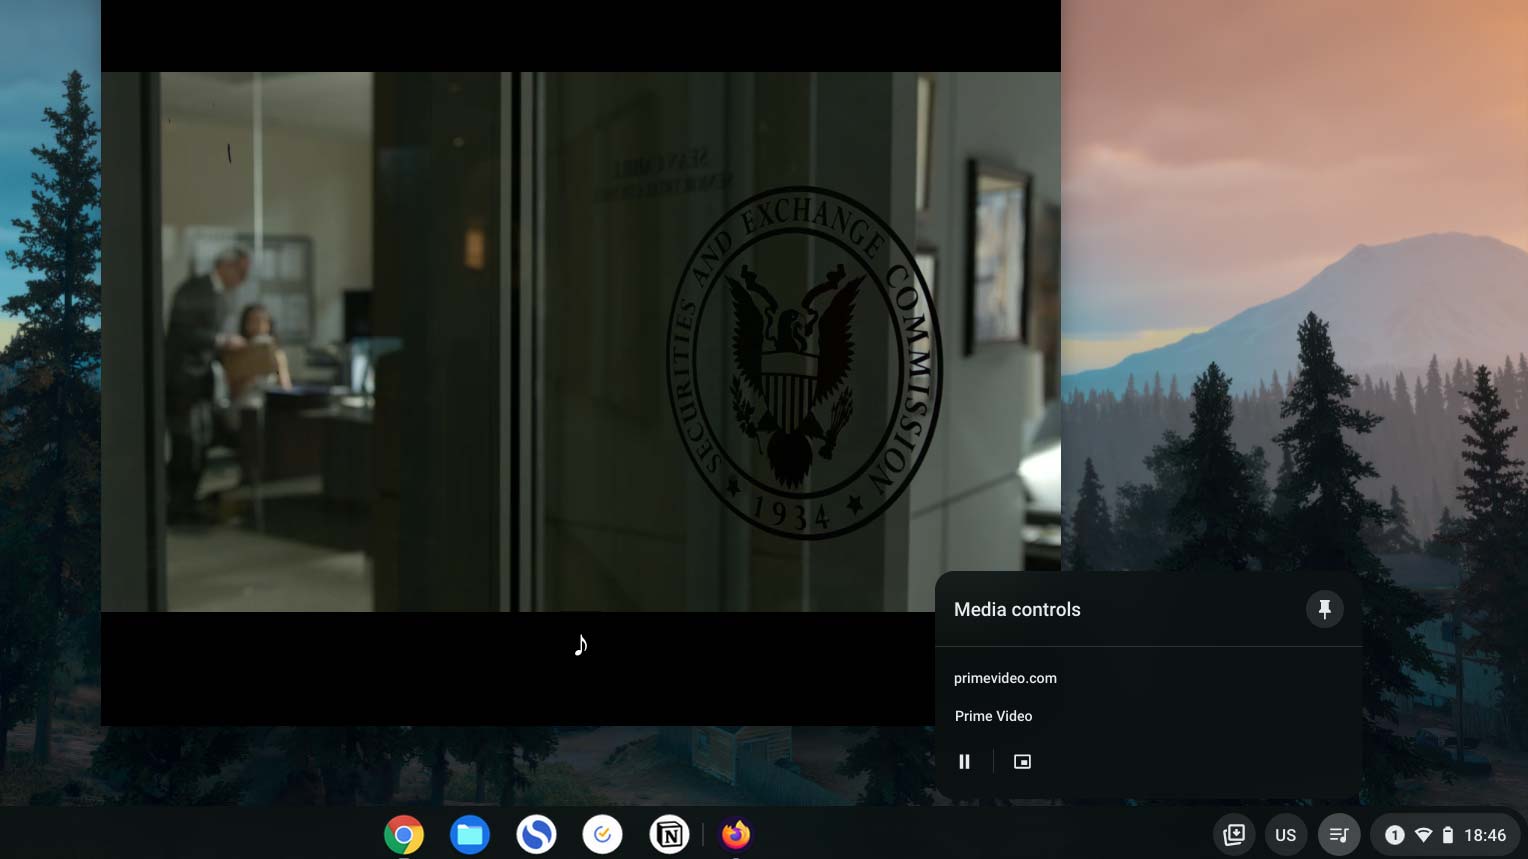 How to watch videos in a picture-in-picture mode